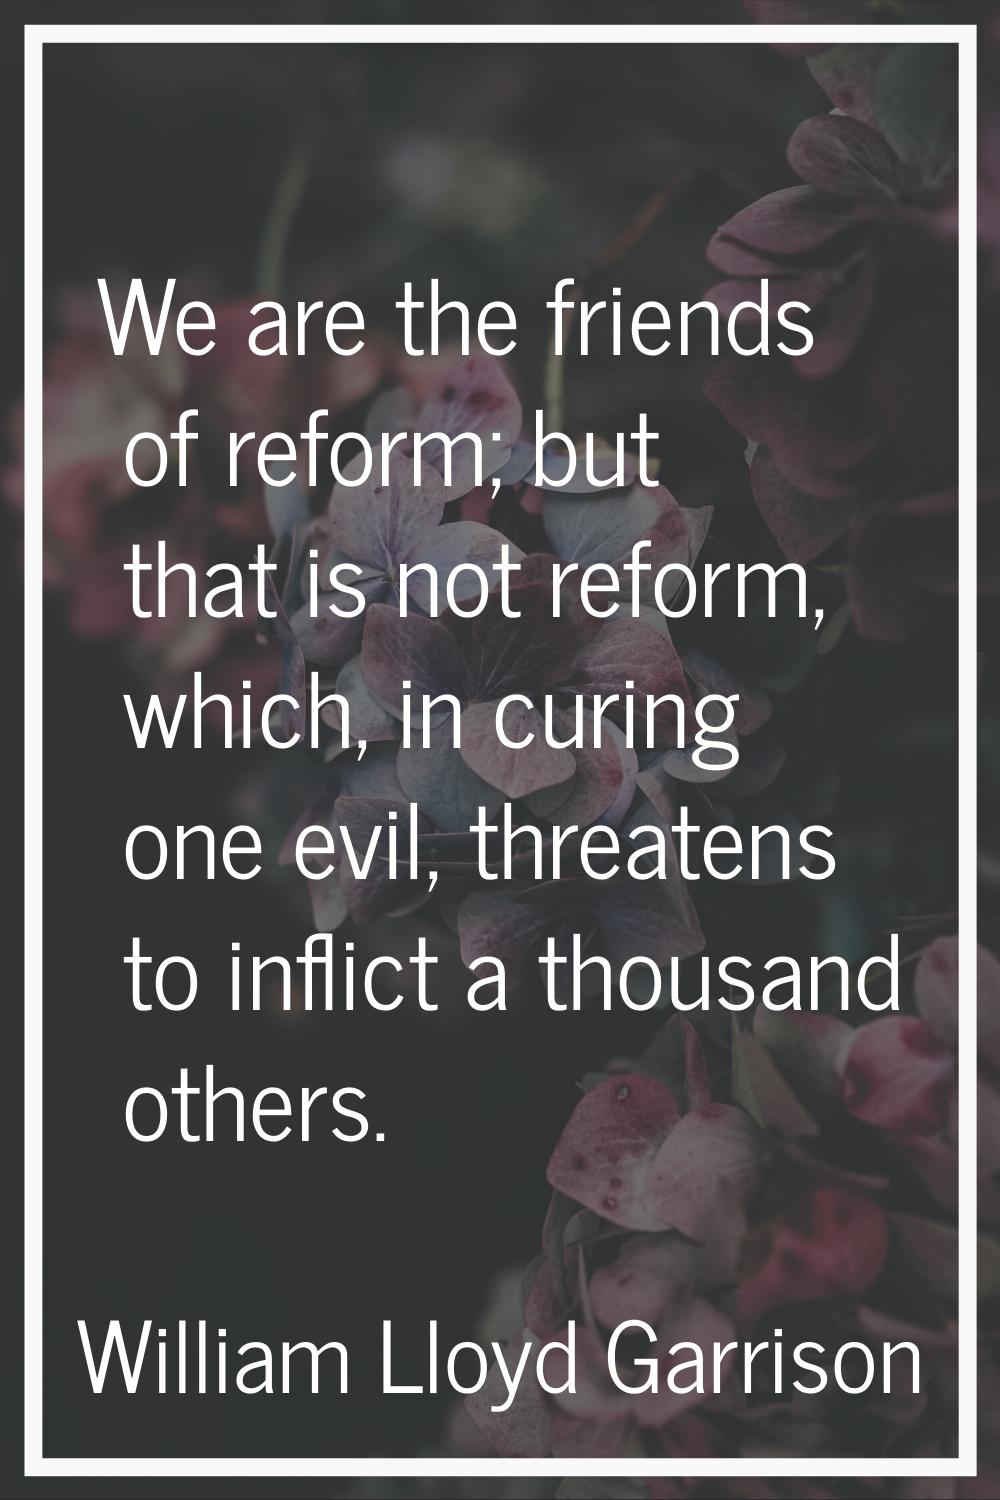 We are the friends of reform; but that is not reform, which, in curing one evil, threatens to infli